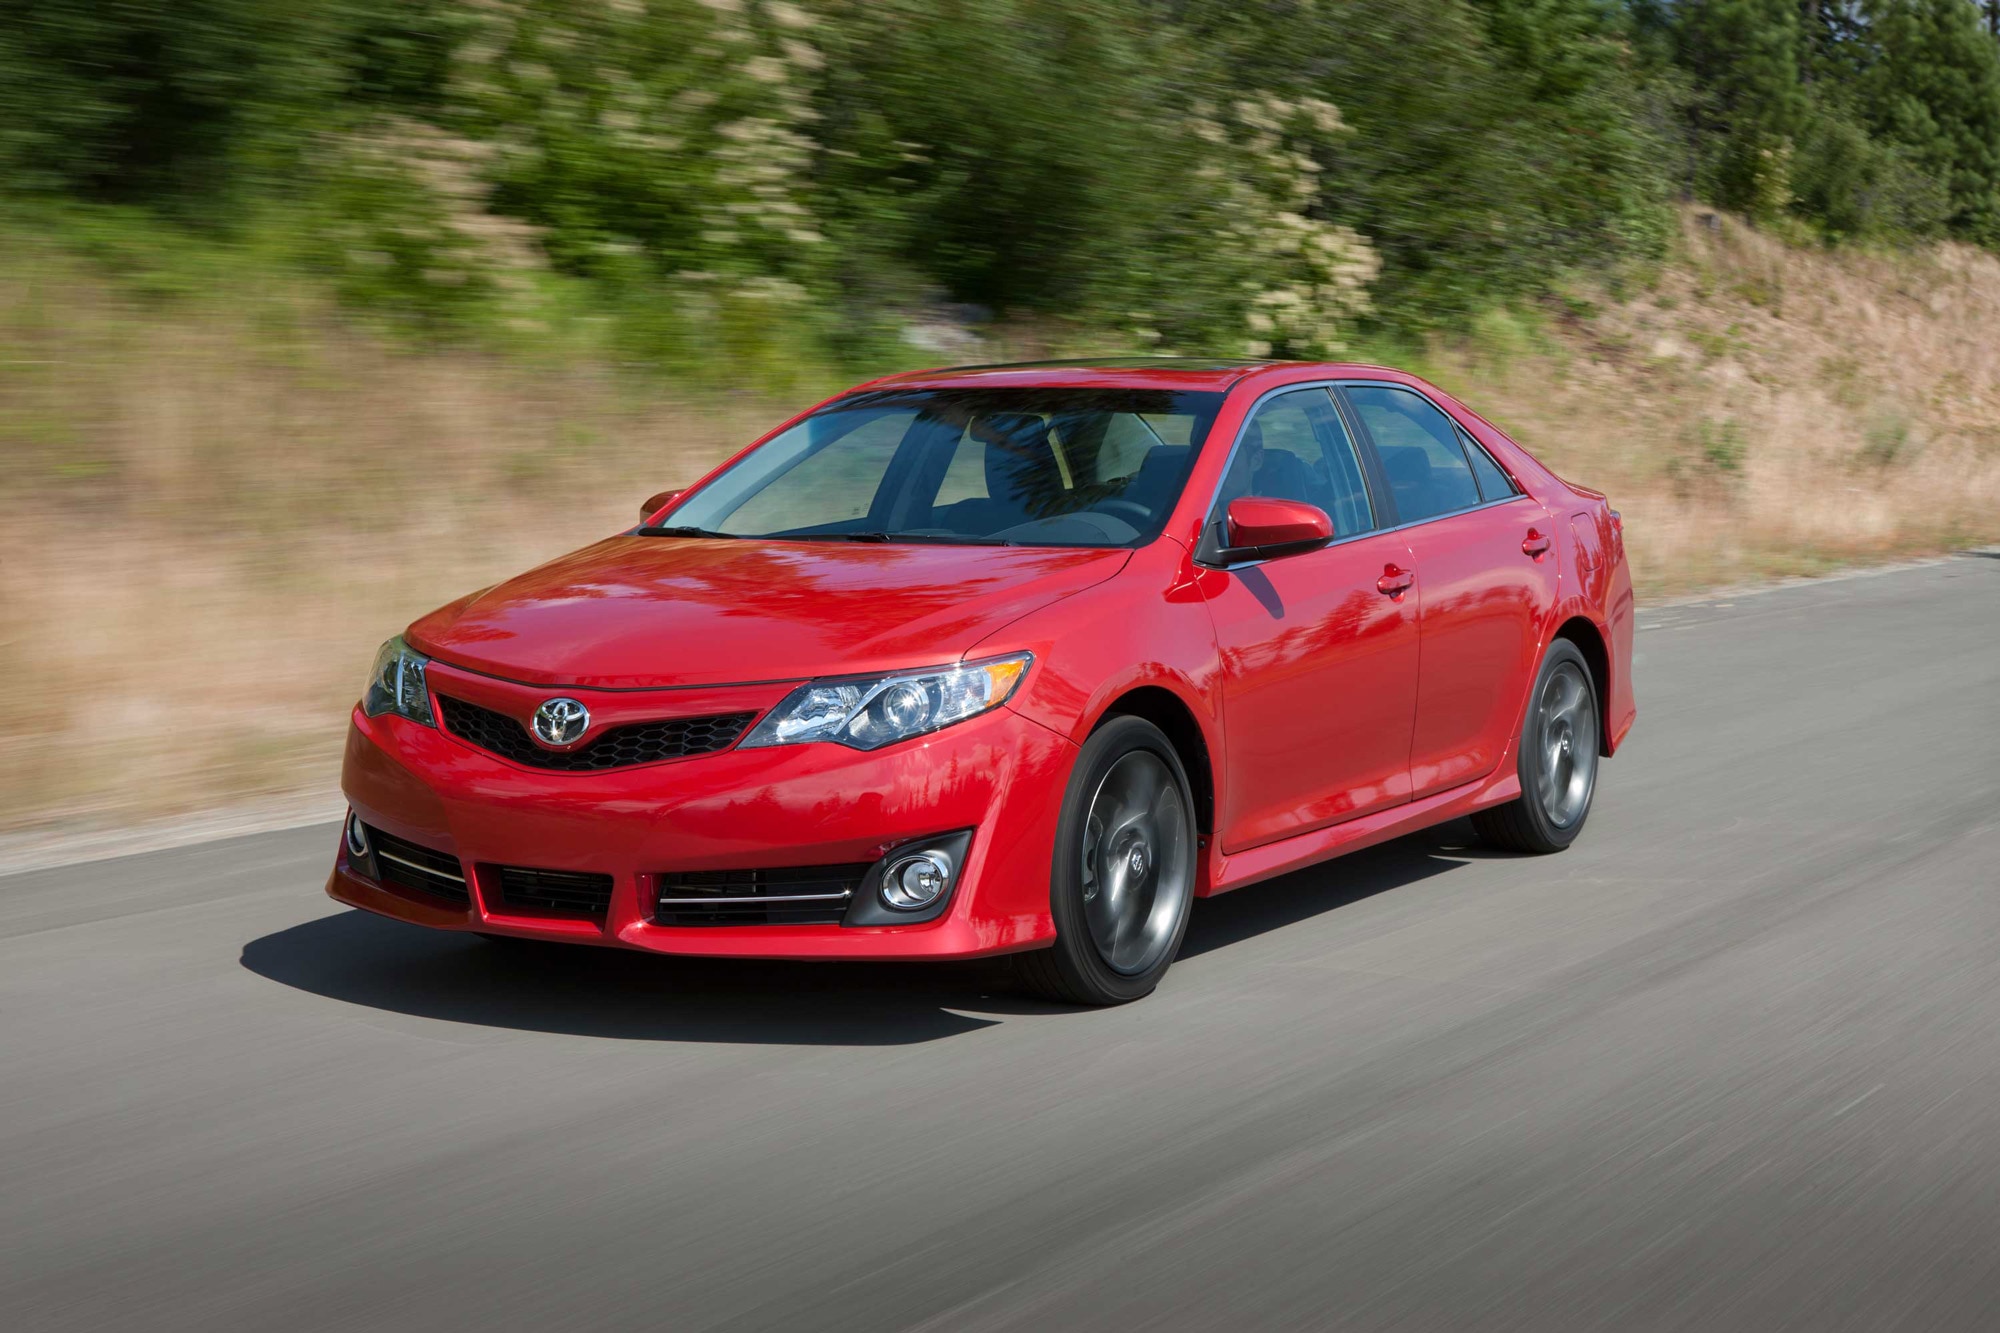 Red 2014 Toyota Camry driving on a road by trees.